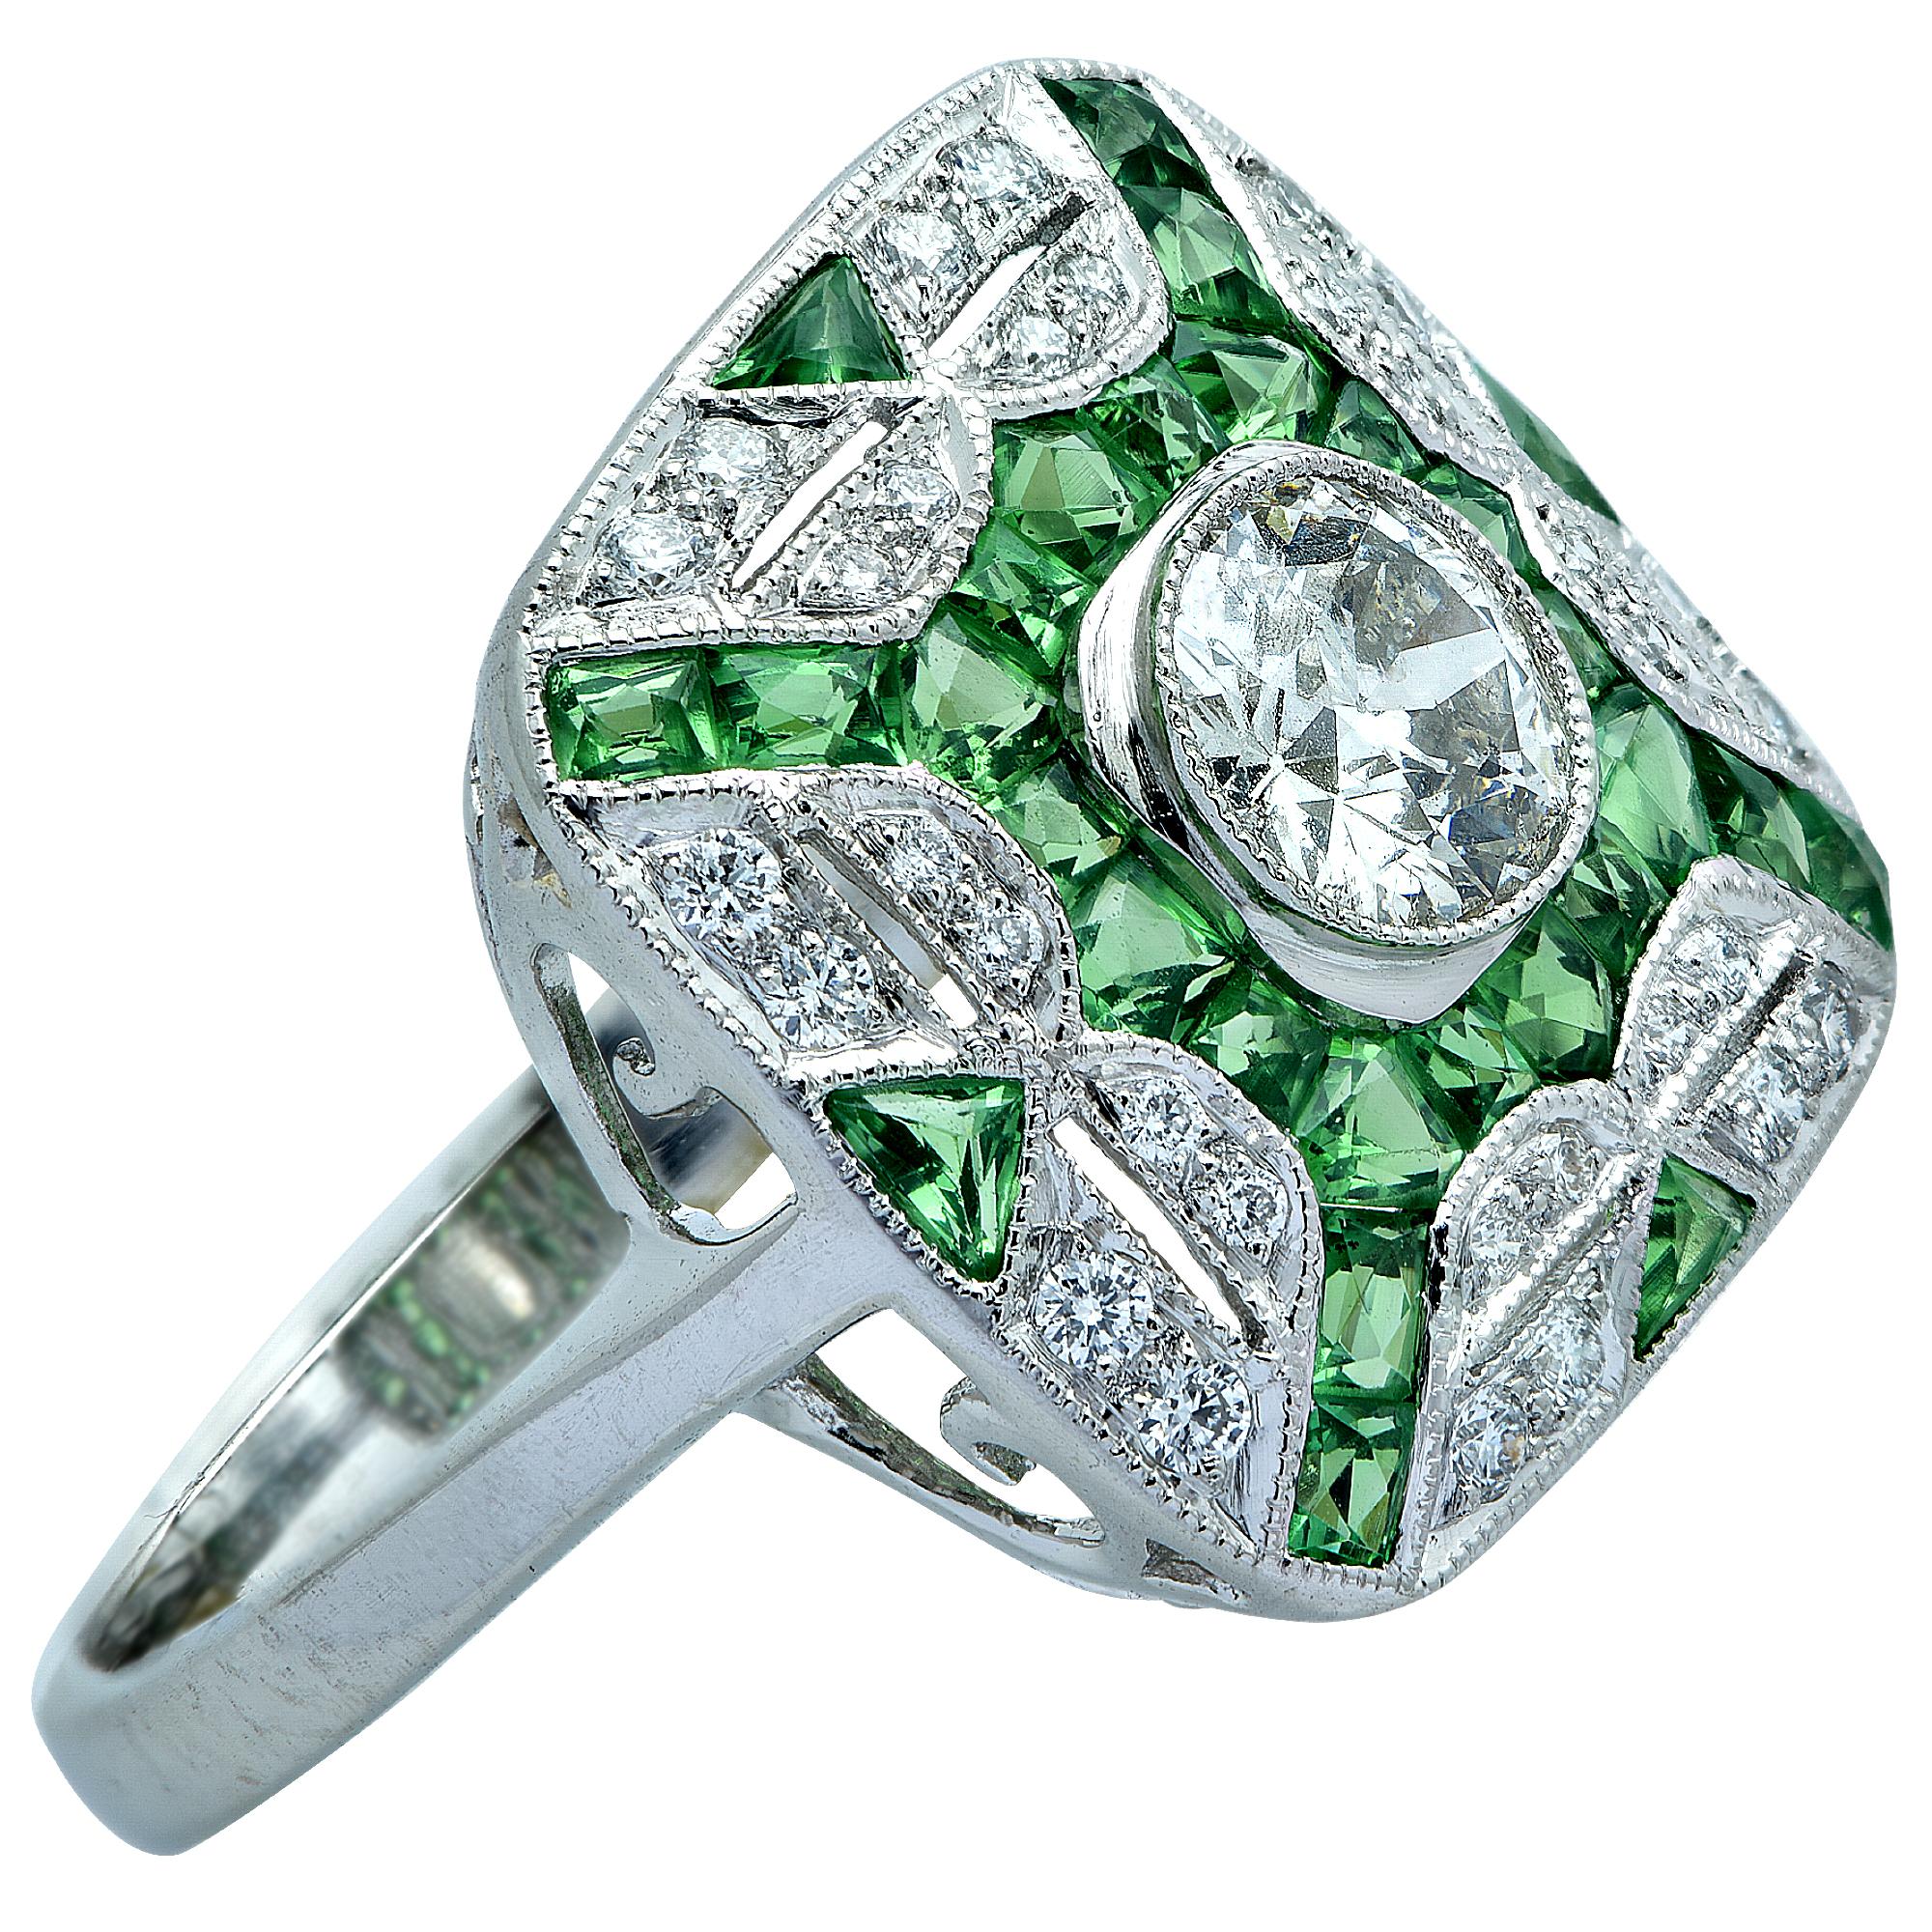 Art Deco Style ring crafted in Platinum featuring a European cut diamond weighing approximately .70 carats, I color and VS1 clarity, surrounded by 32 diamonds weighing approximately .40 carats total, and 24 vivid green tsavorite garnets weighing